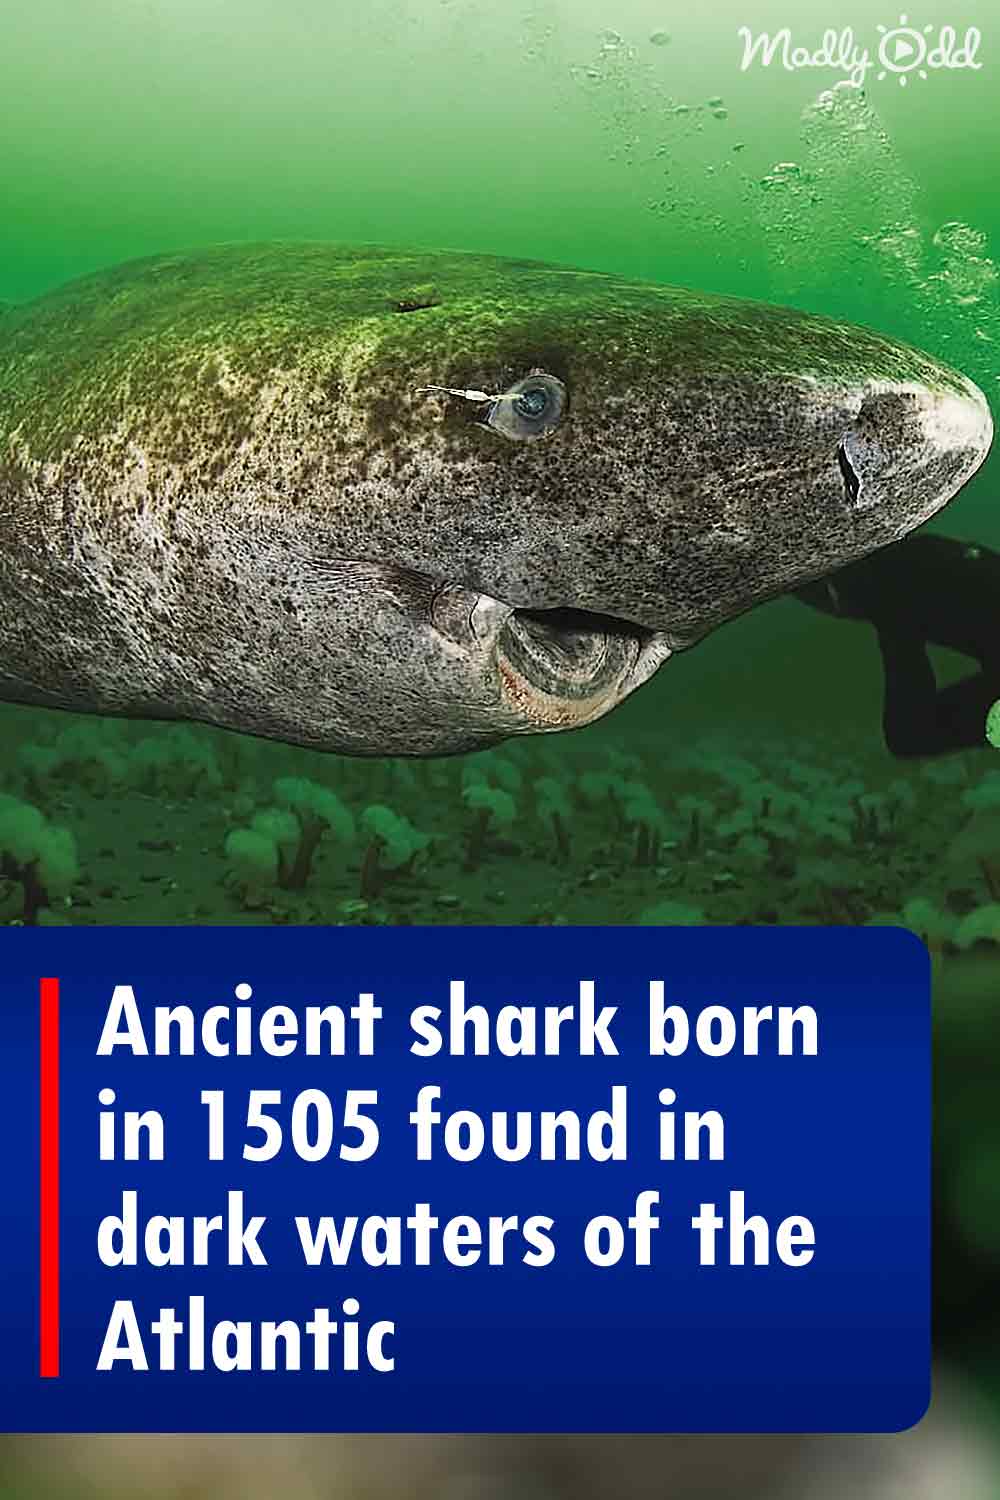 Ancient shark born in 1505 found in dark waters of the Atlantic